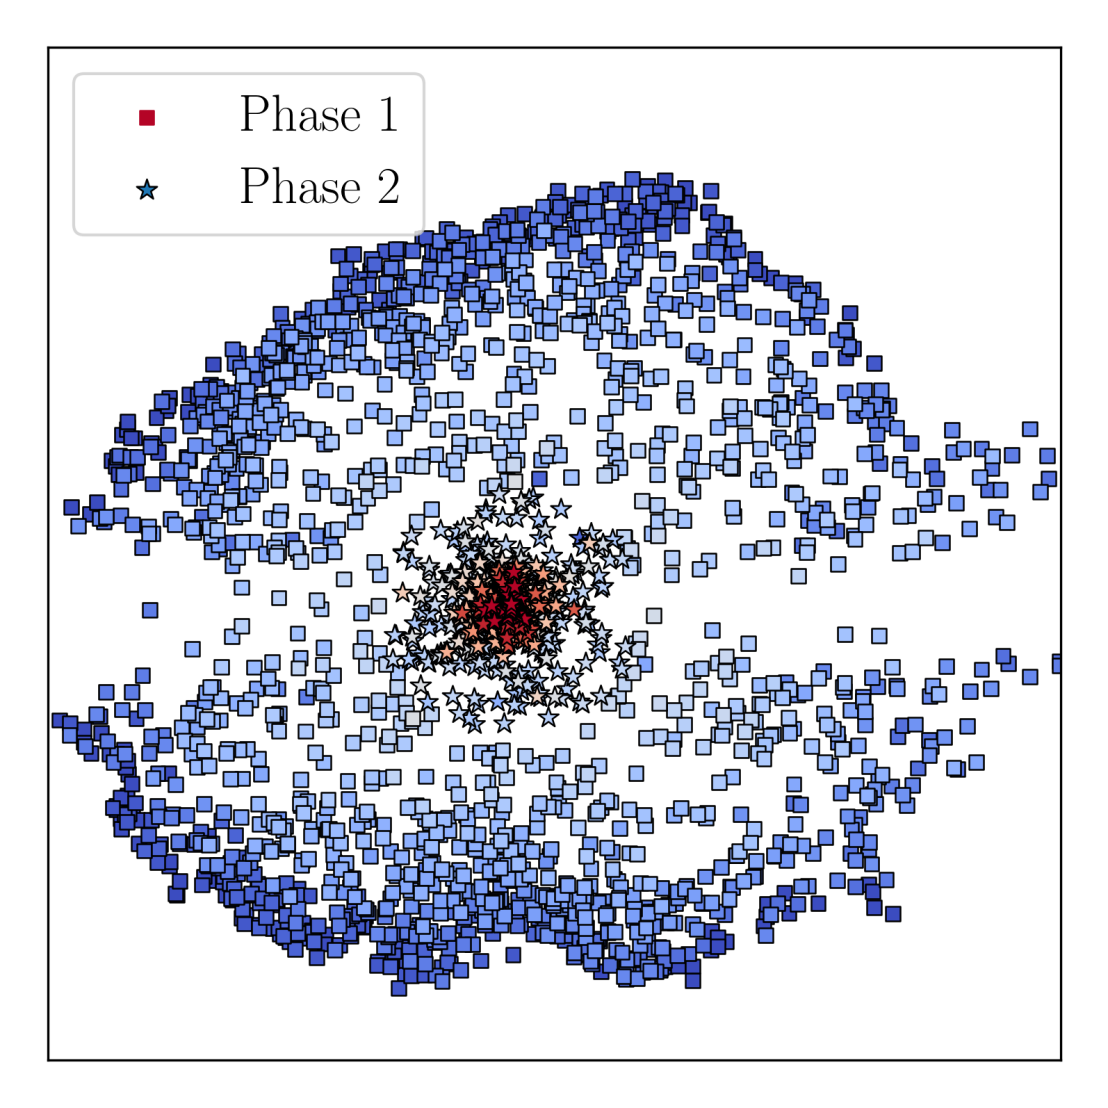 Enlarged view: Clustering